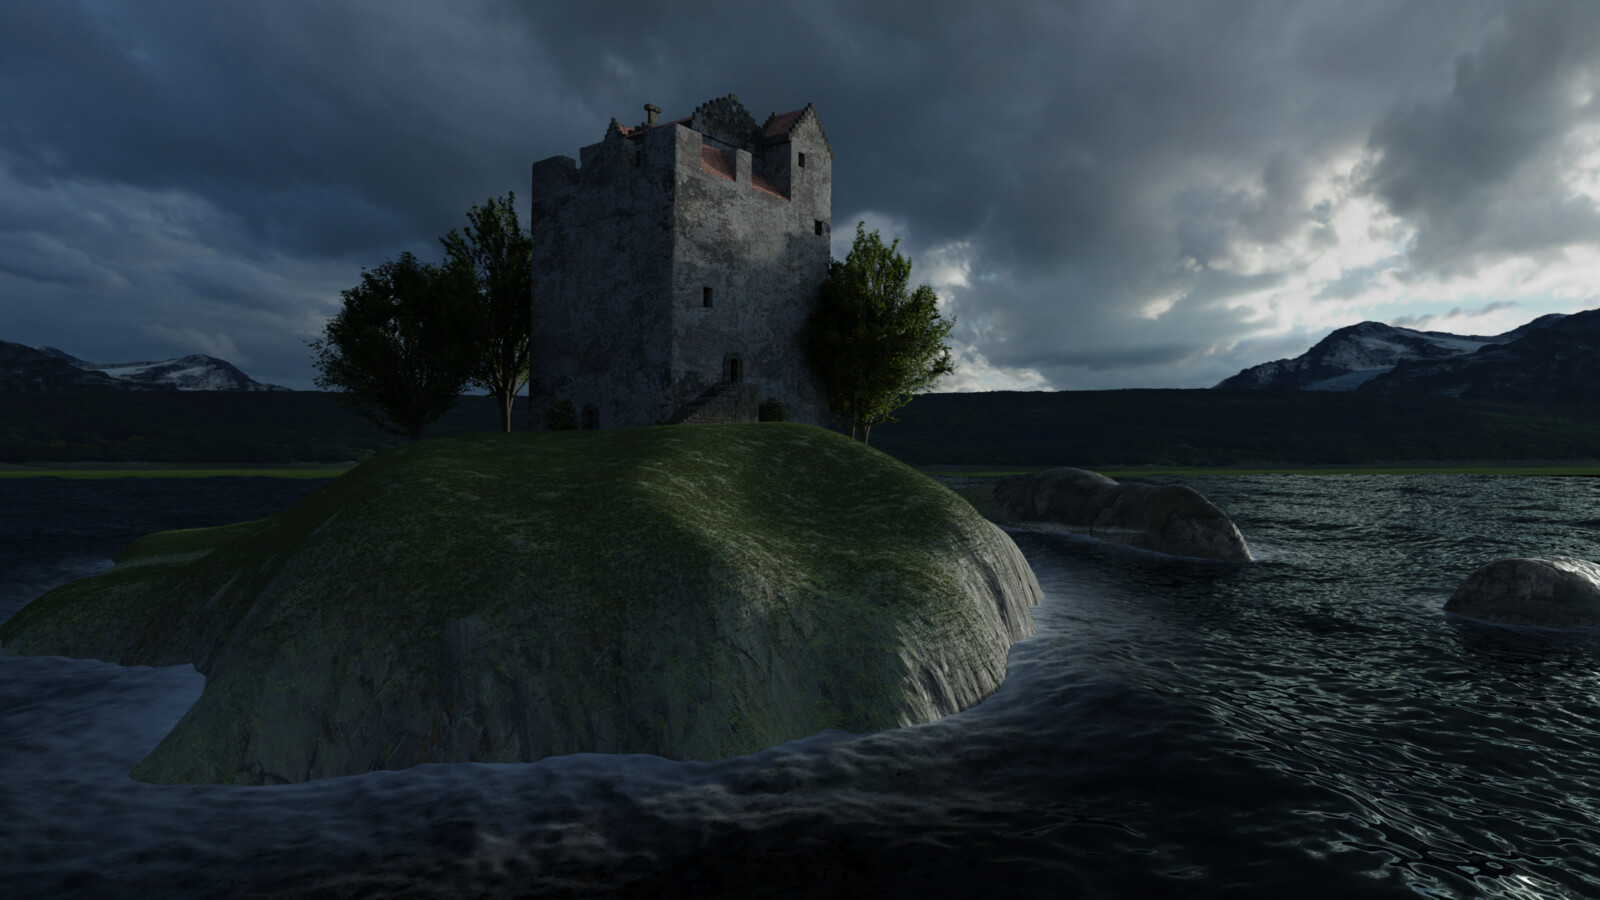 Castle Render 1 - scaling is difficult